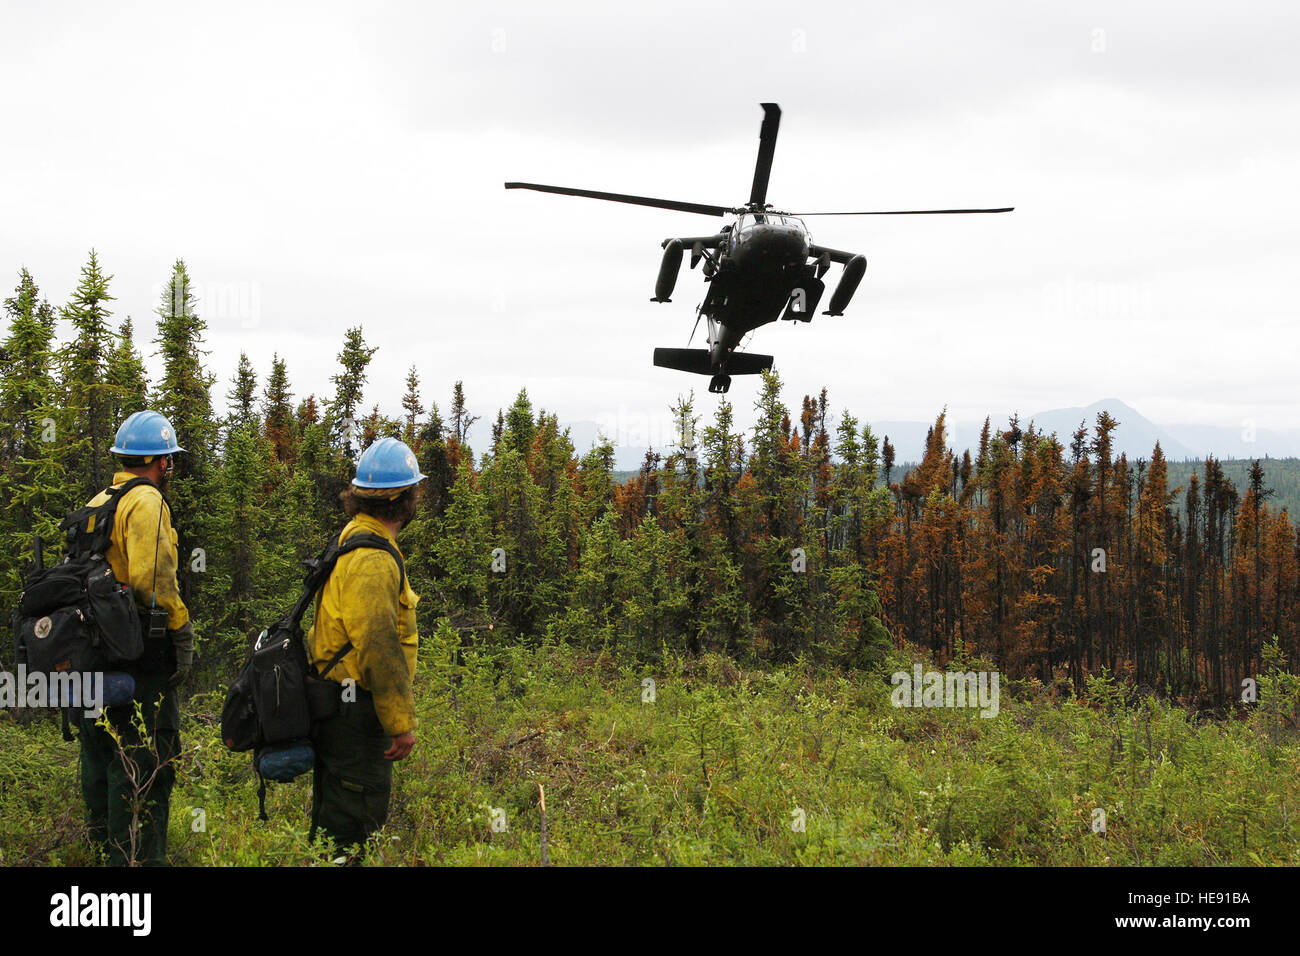 Members with the U.S. Forest Service's Lassen Interagency Hotshot crew stationed at Susanville, Calif., observe an Alaska Army National Guard UH-60 Black Hawk helicopter approach a landing zone June 30, 2013, over Palmer, Alaska. The 21-member team contained a 40-acre wildfire and conducted clean up operations.  Percy Jones, U.S. Air Force Stock Photo